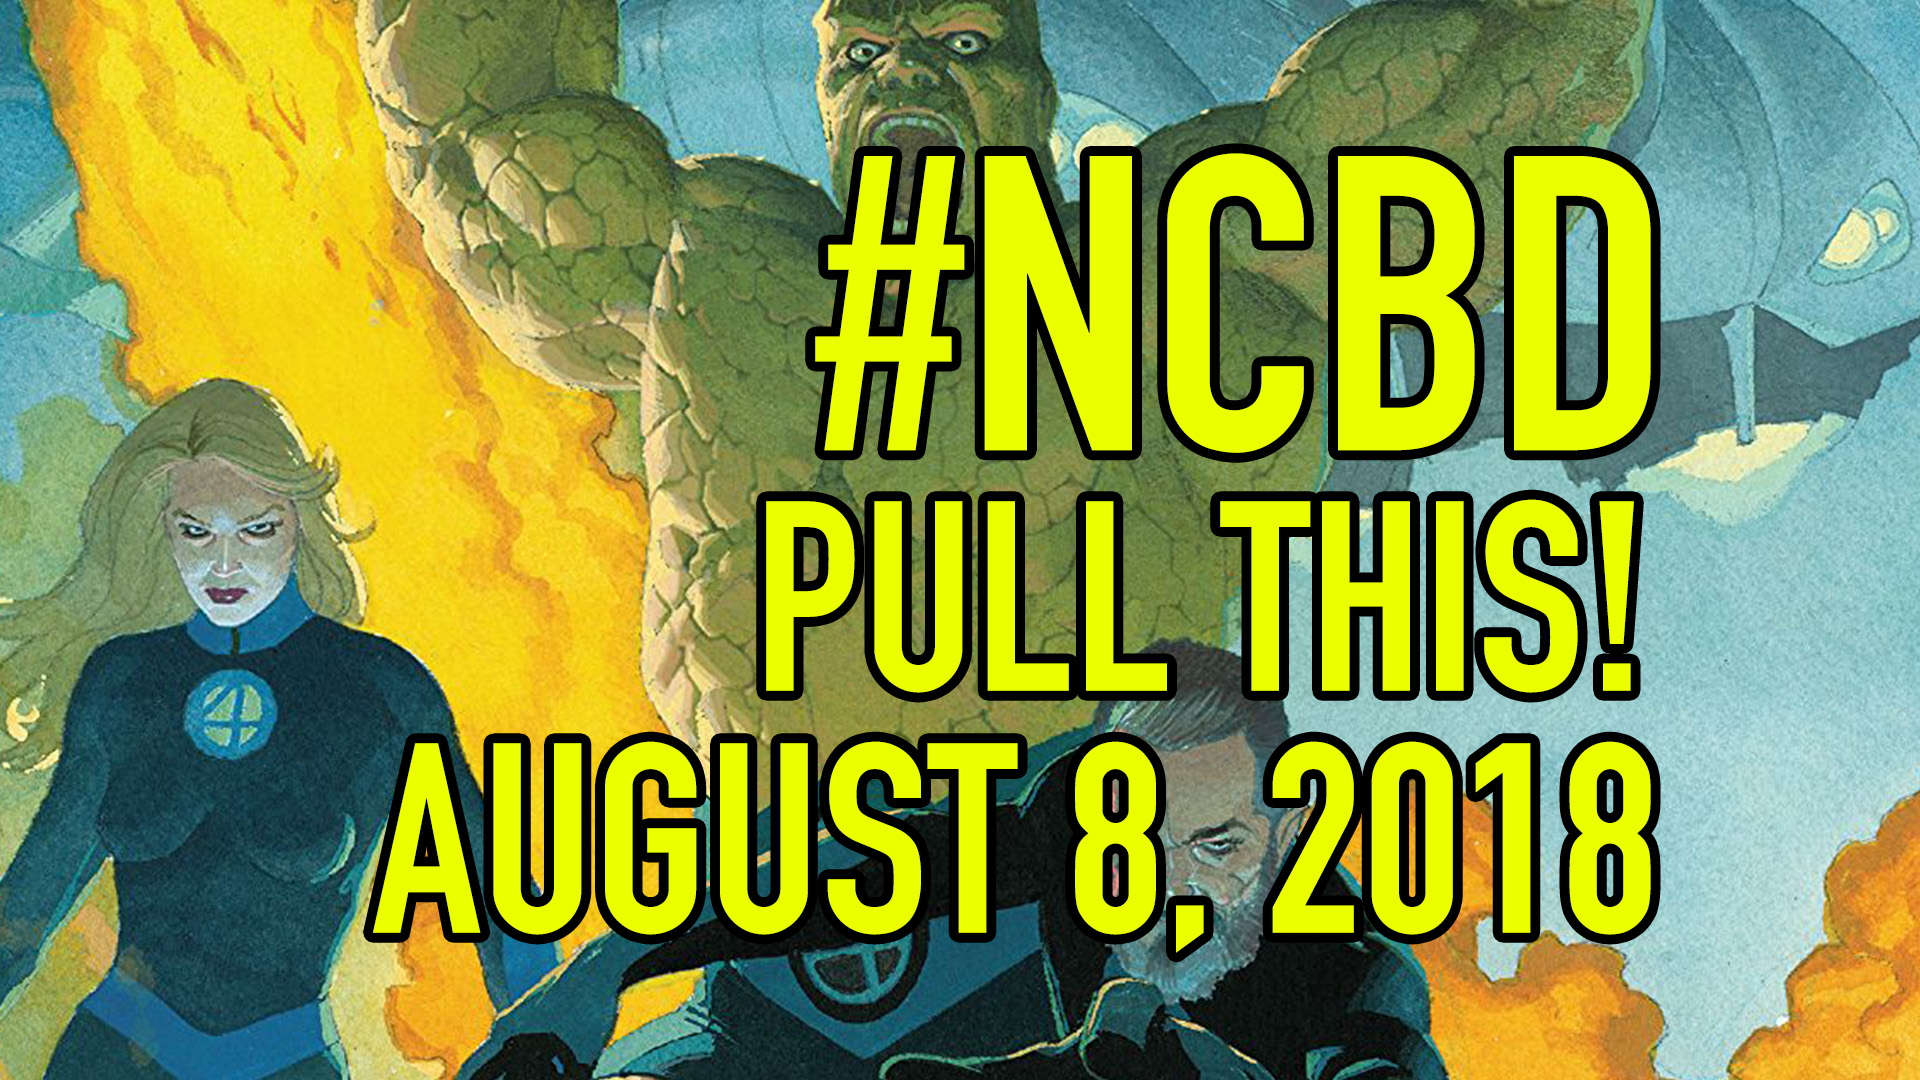 #NCBD Pull This! August 8, 2018: The 5 comic books you should buy this week